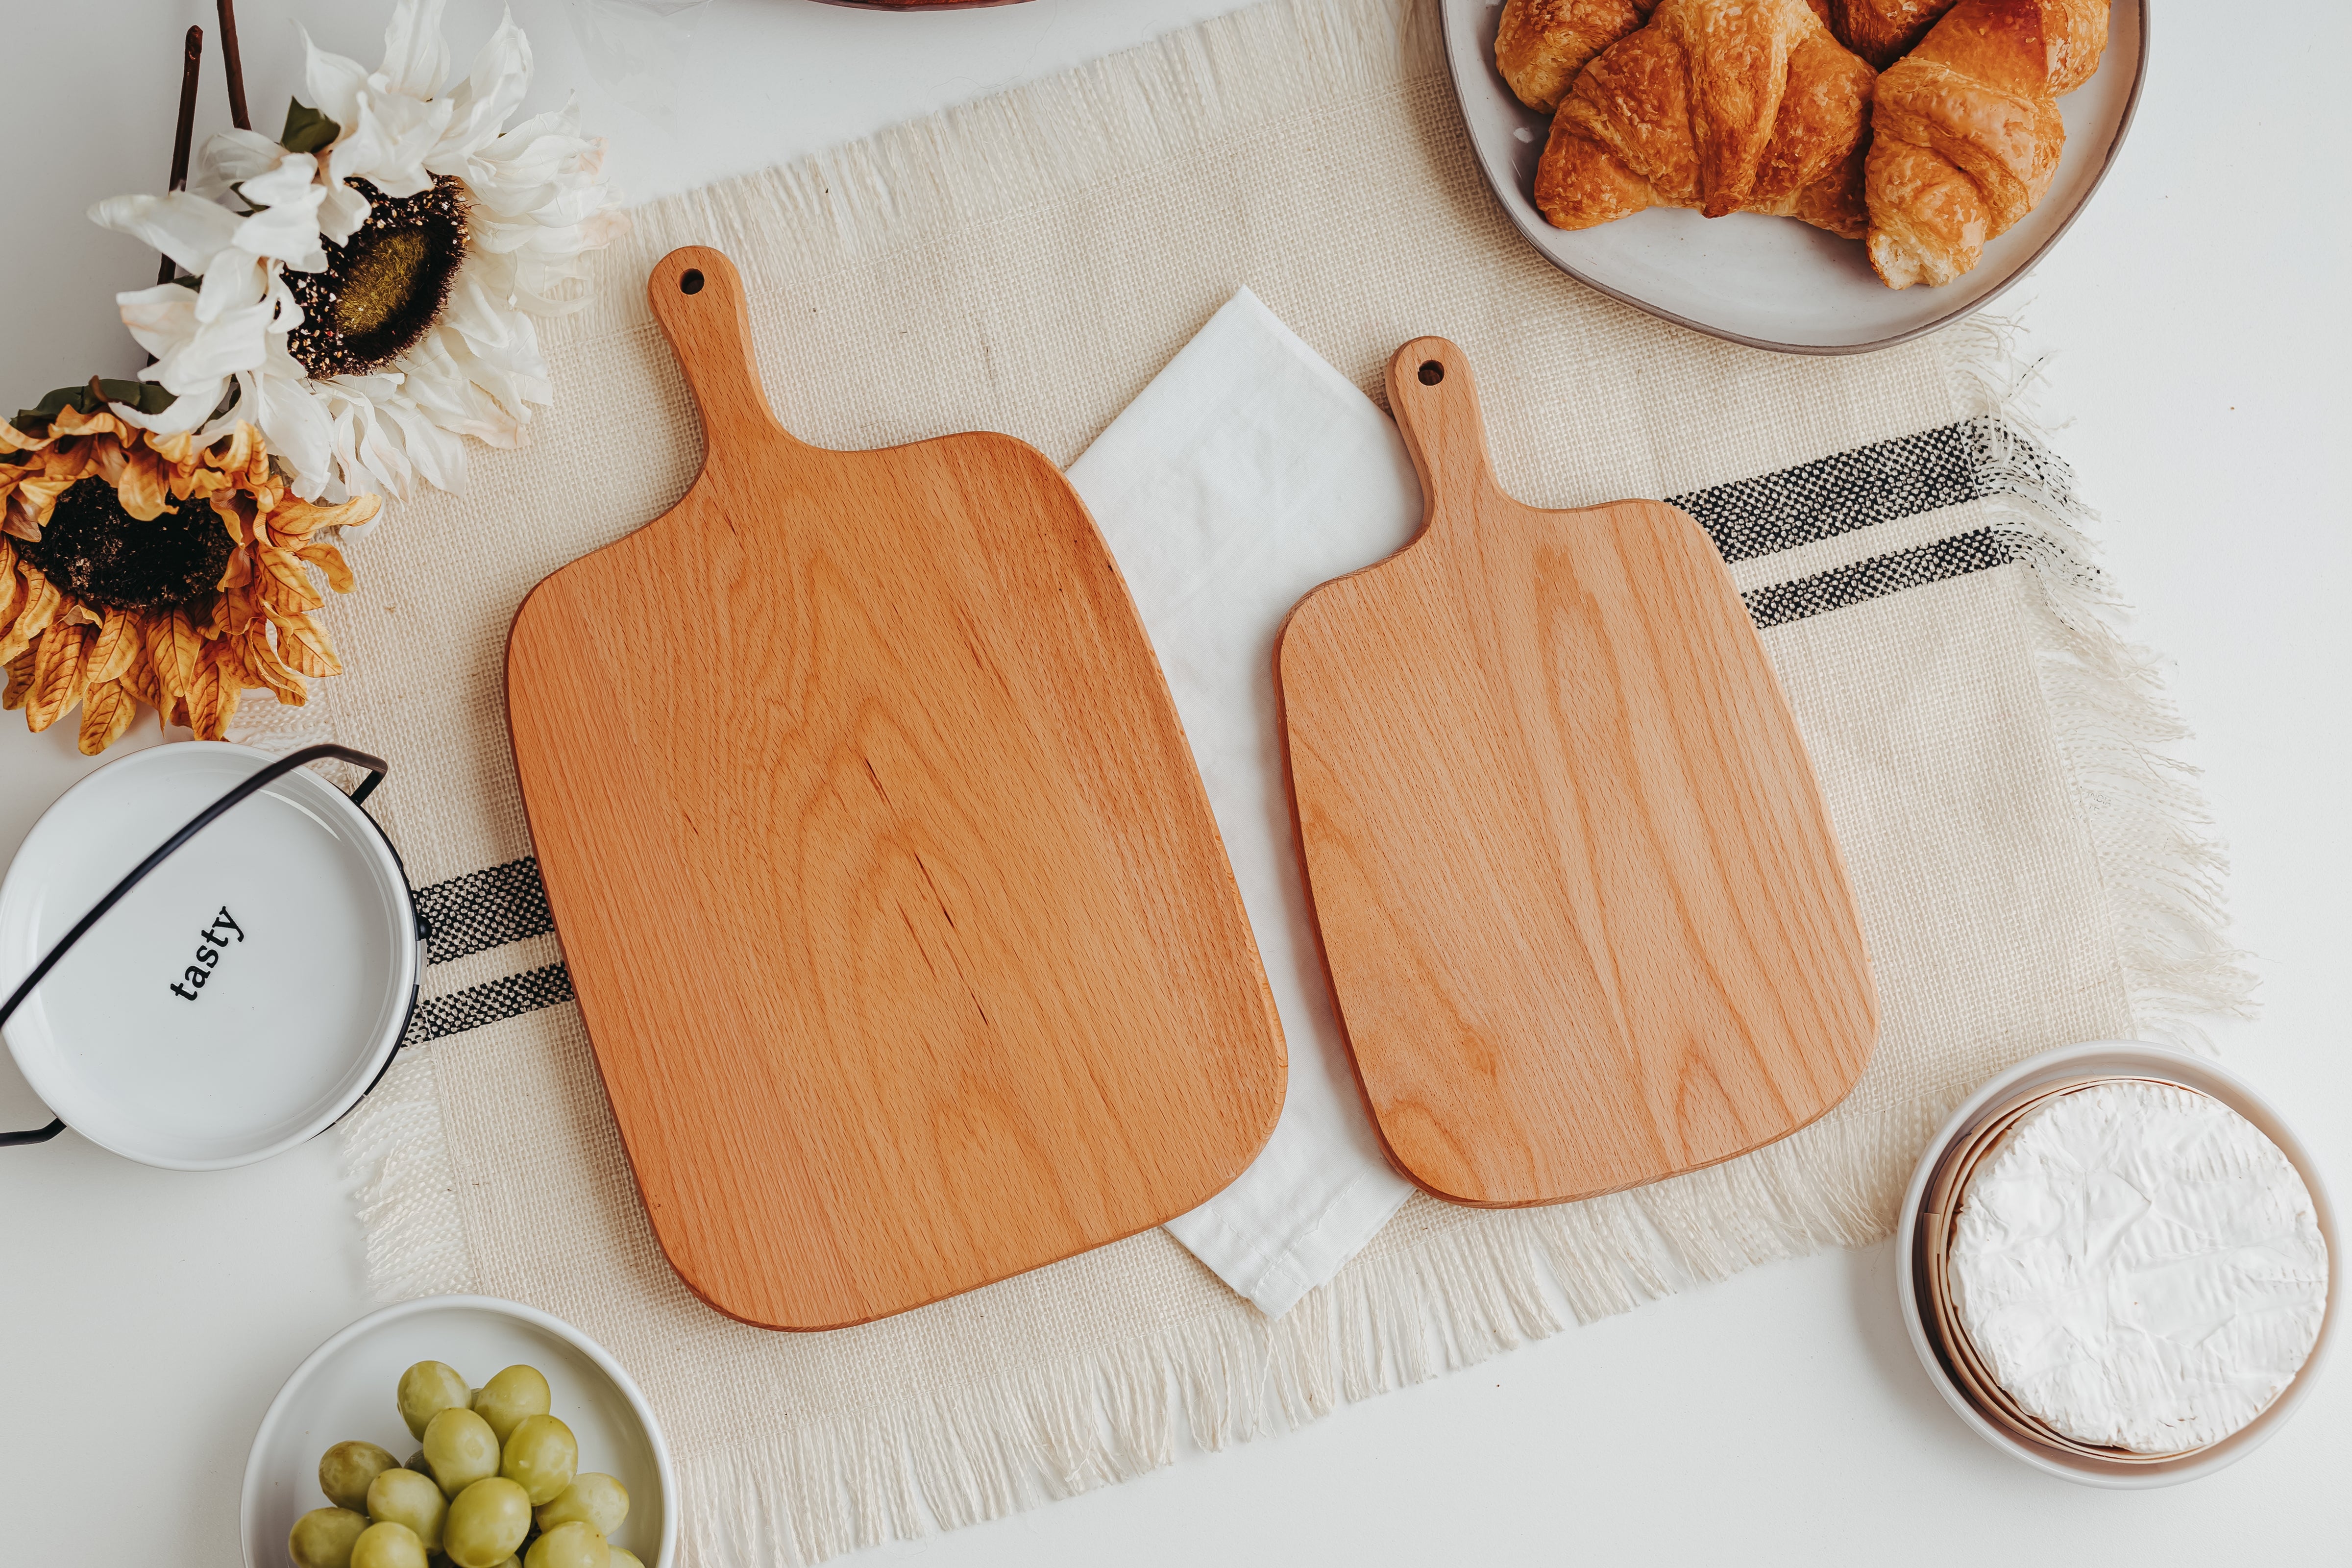 If I Have To Stir It Mini Cutting Board - Queen B Home